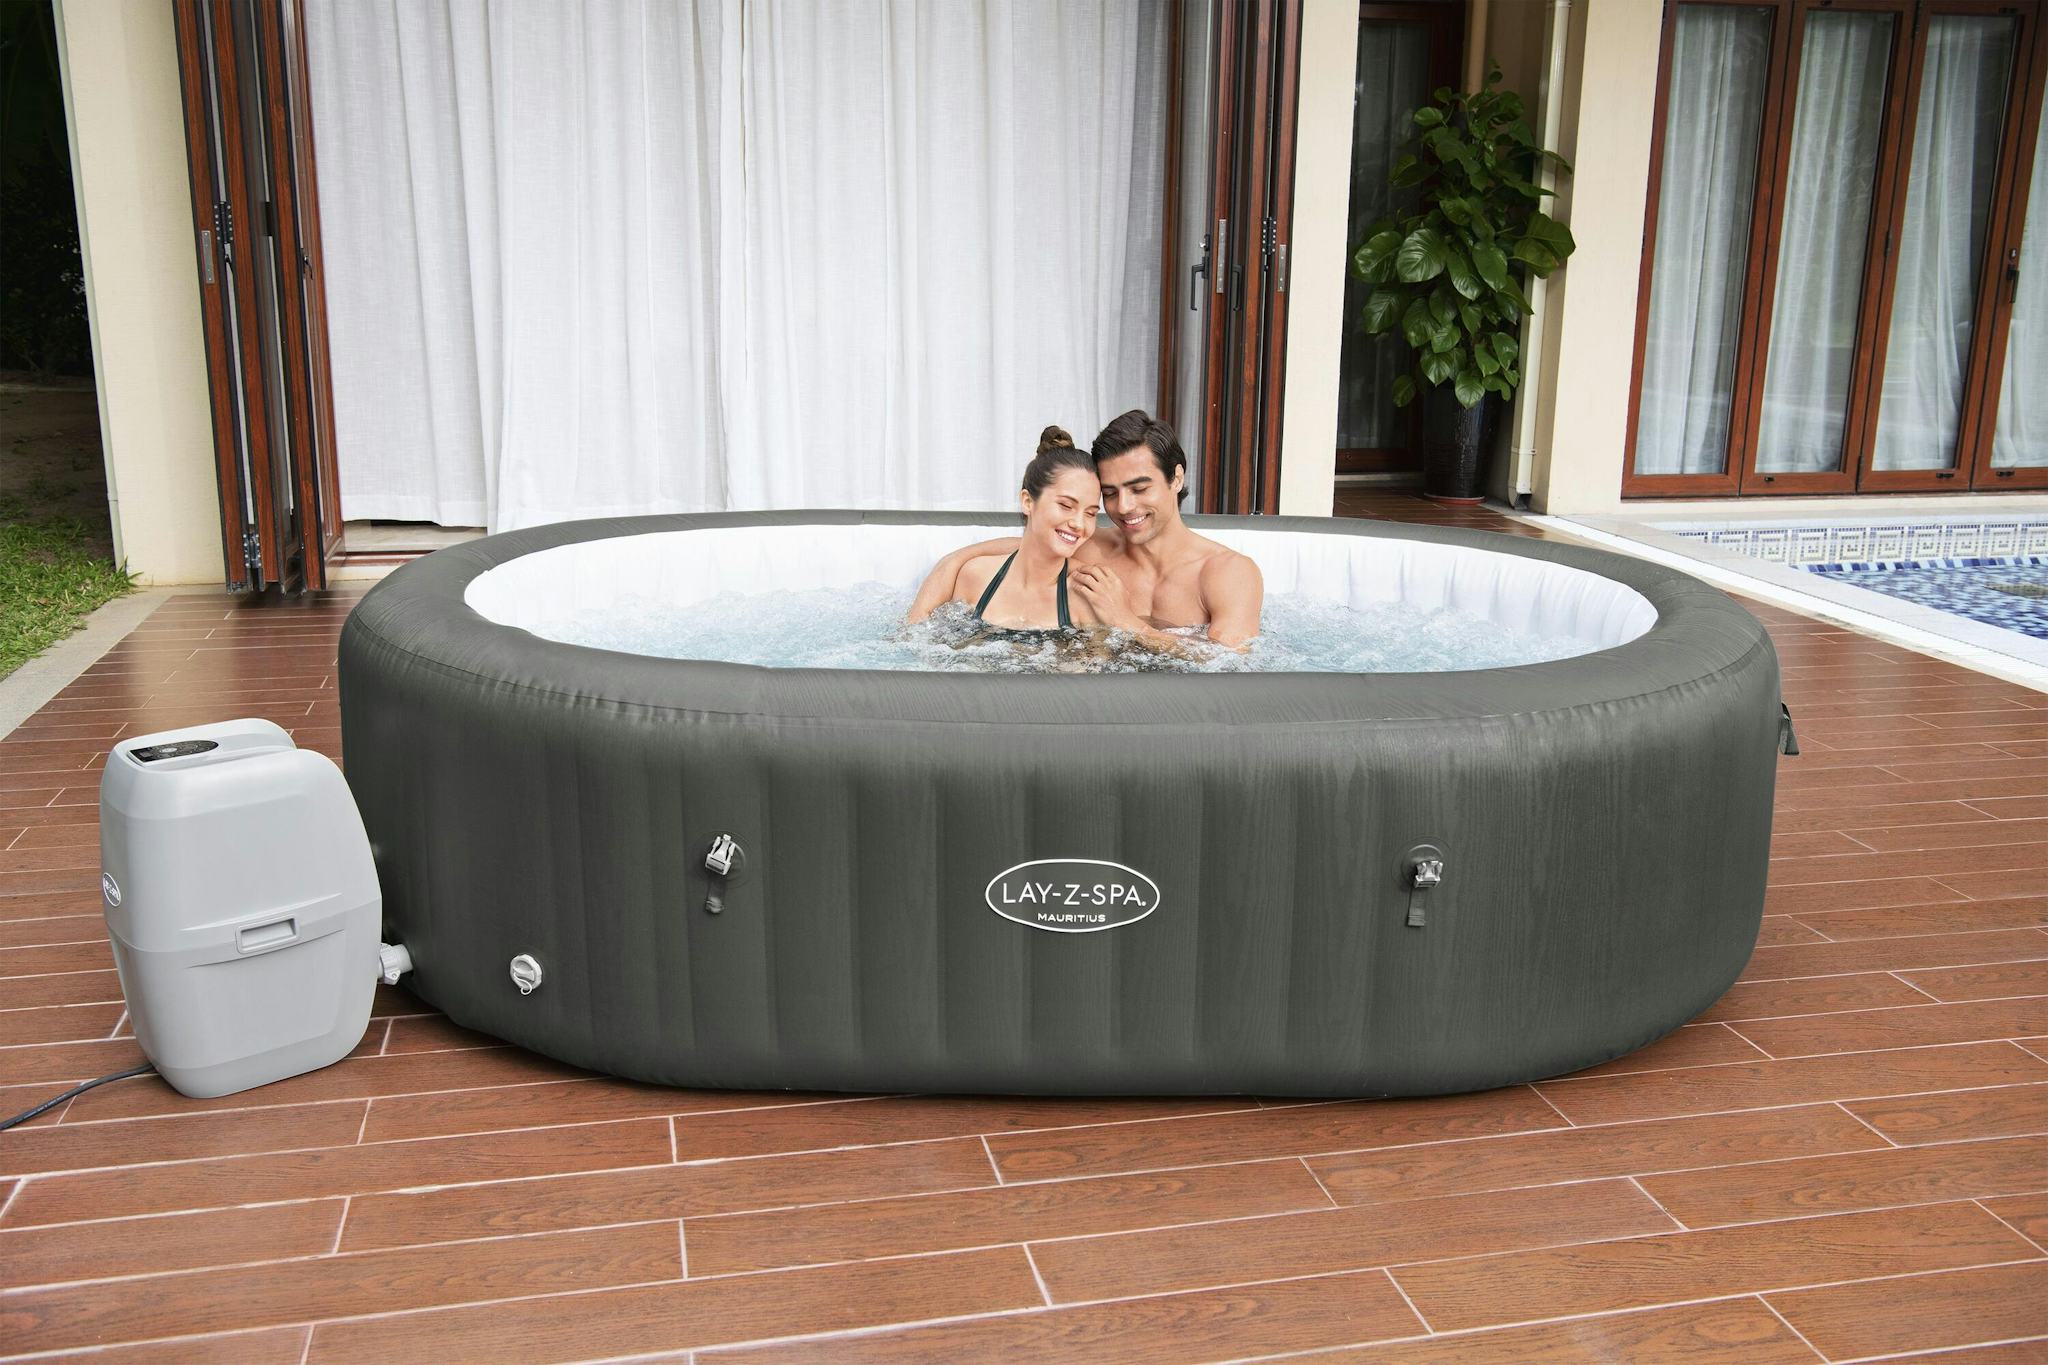 Spas Gonflables Spa gonflable ovale Lay-Z-Spa Mauritius Airjet™ 5 - 7 personnes Bestway 6